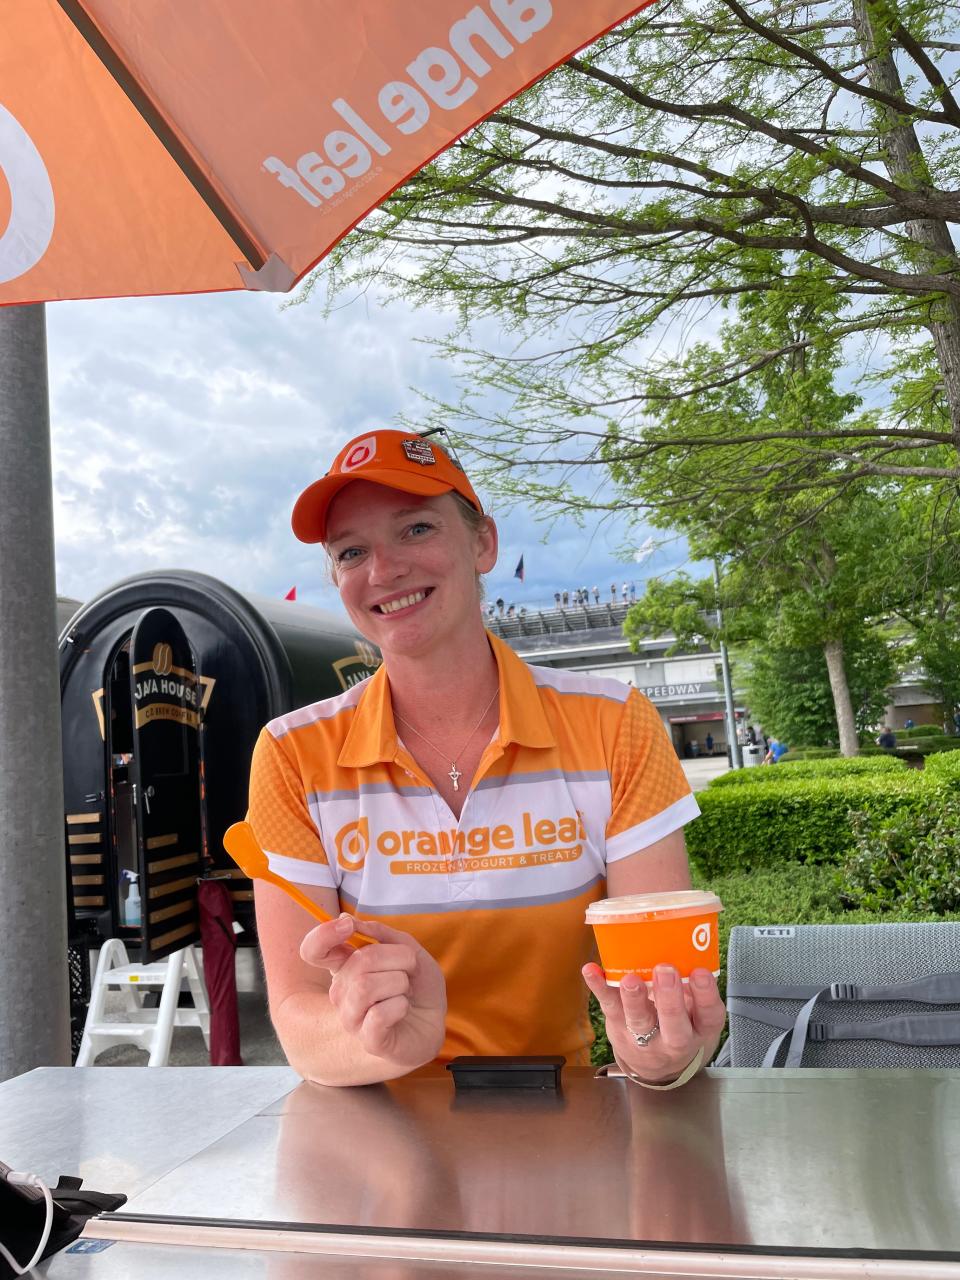 Orange Leaf frozen yogurt is a new food item at Indianapolis Motor Speedway during the Indy 500 this year.